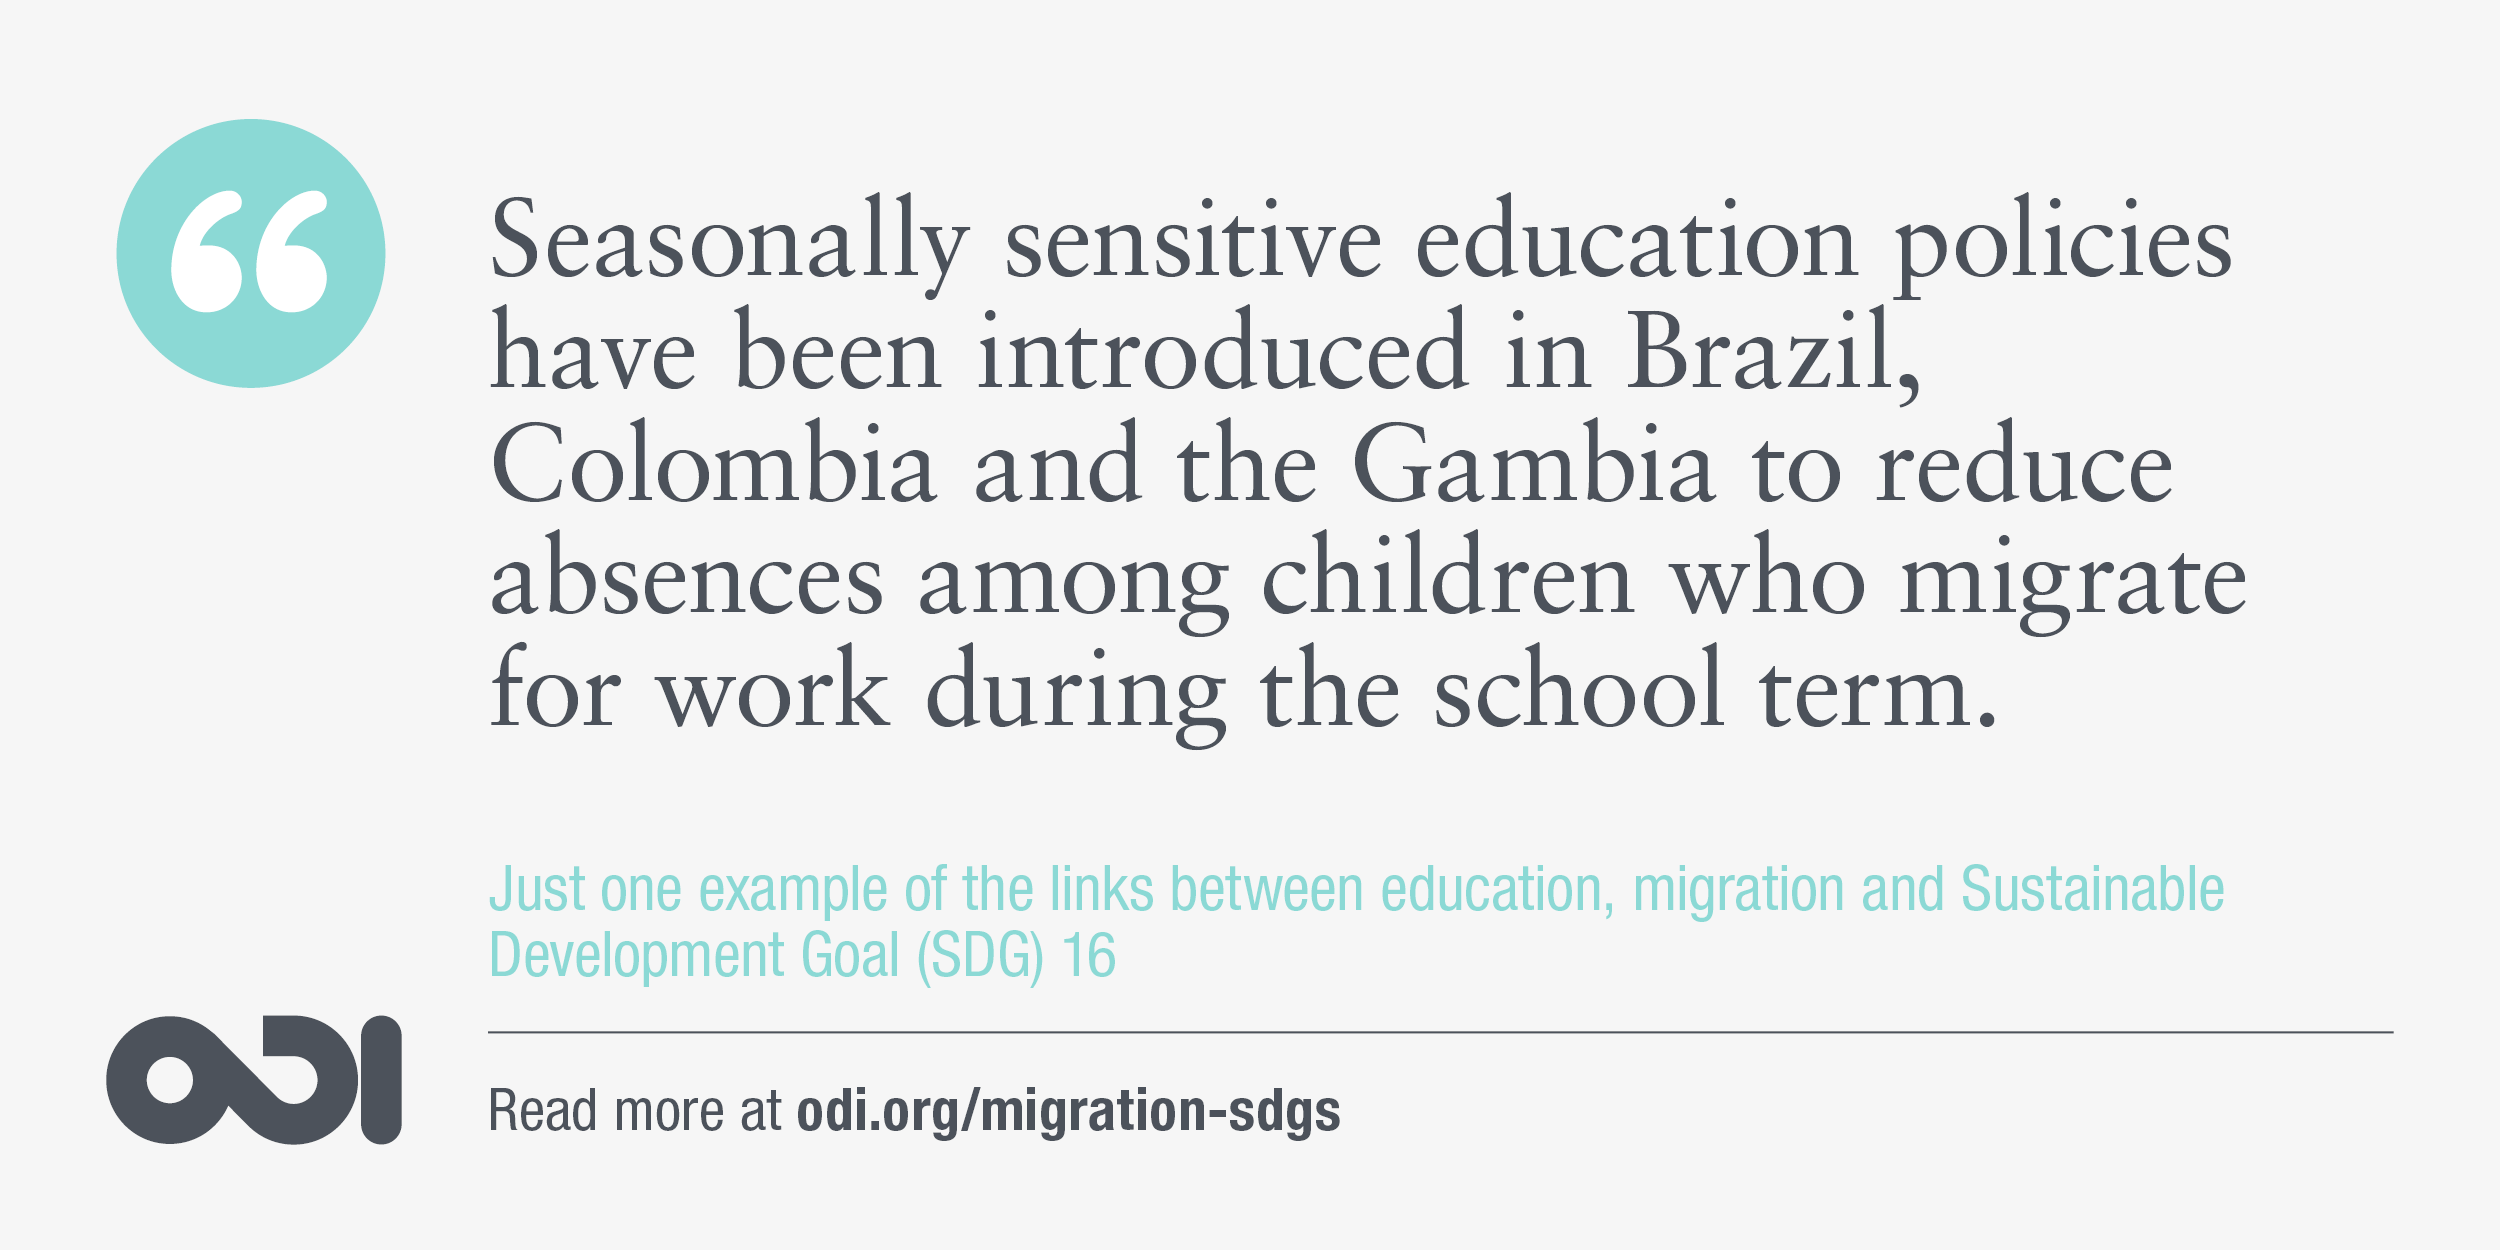 The links between education, migration and SDG